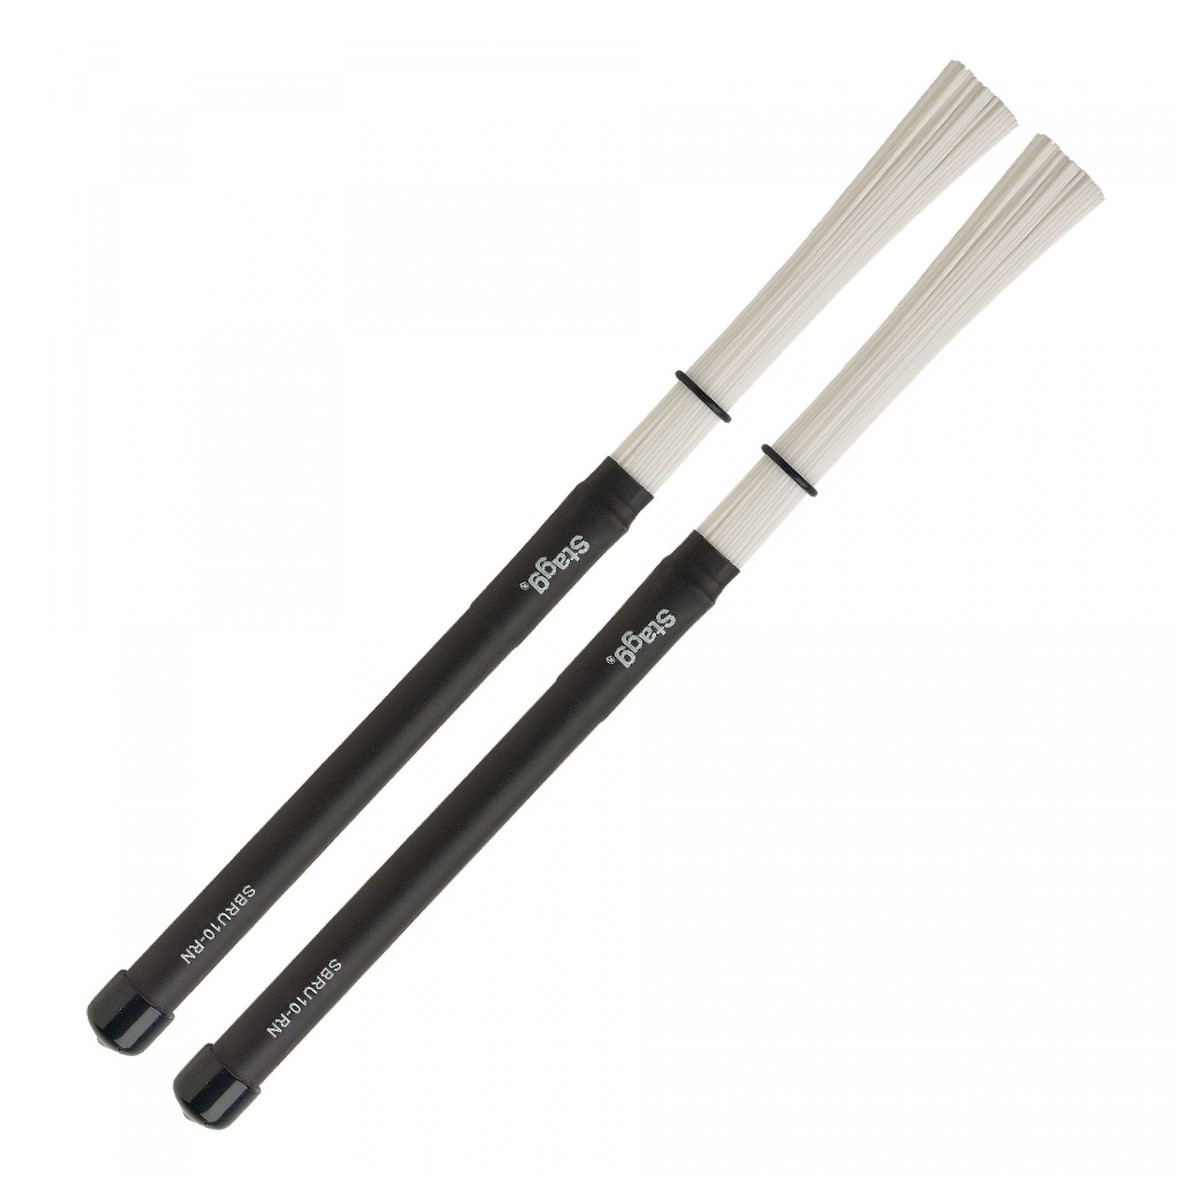 An image of Stagg Nylon Brushes SBRU10-RN with Rubber Handles